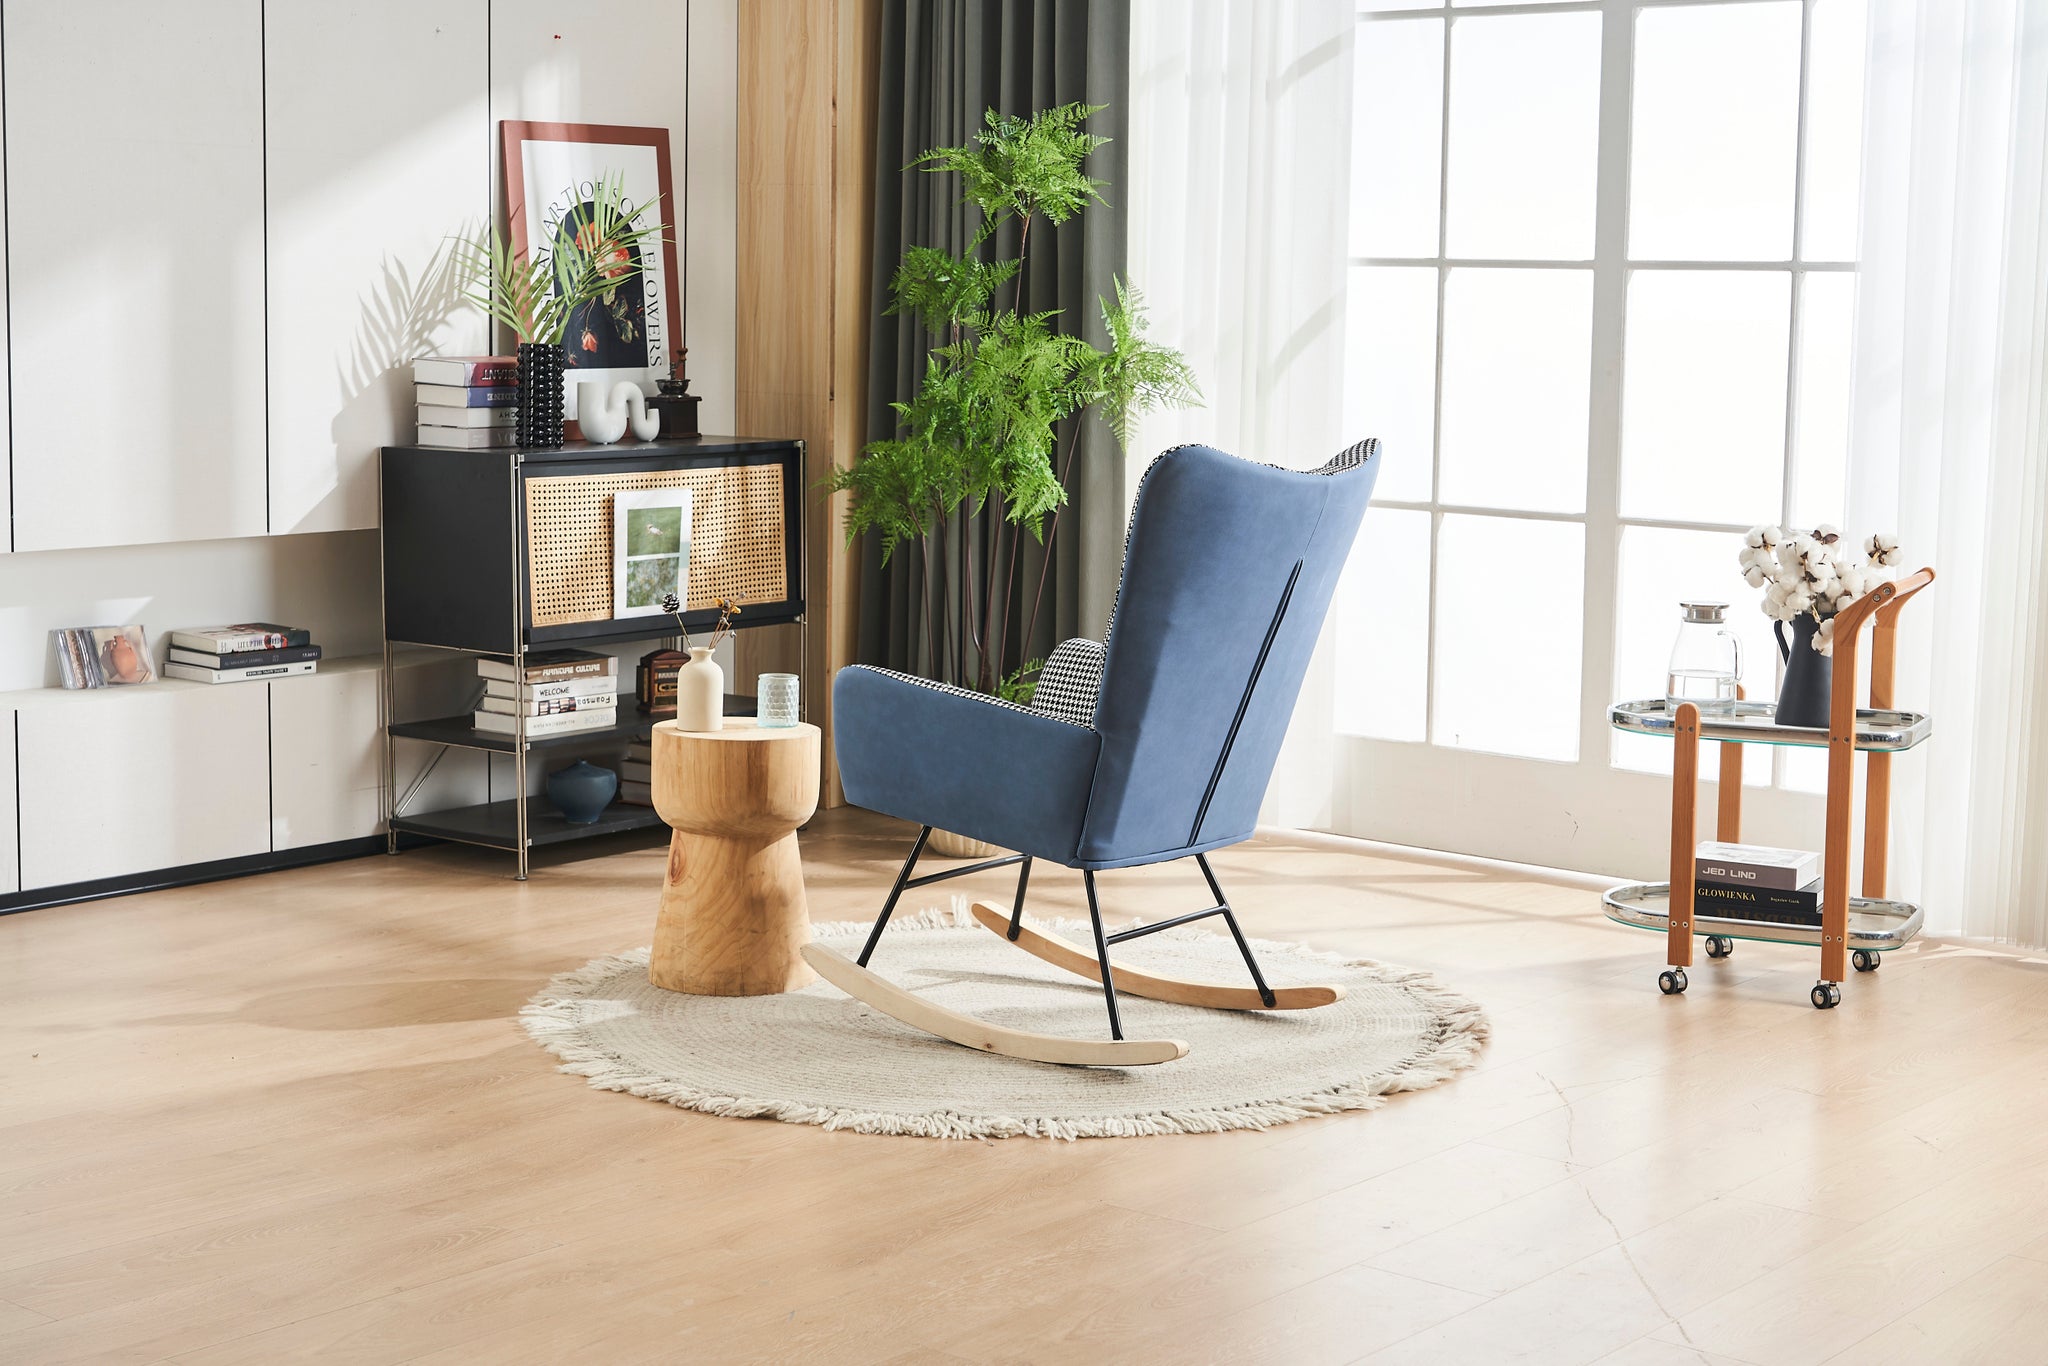 Rocking Chair Nursery, Solid Wood Legs Reading Chair blue-primary living space-modern-rocking